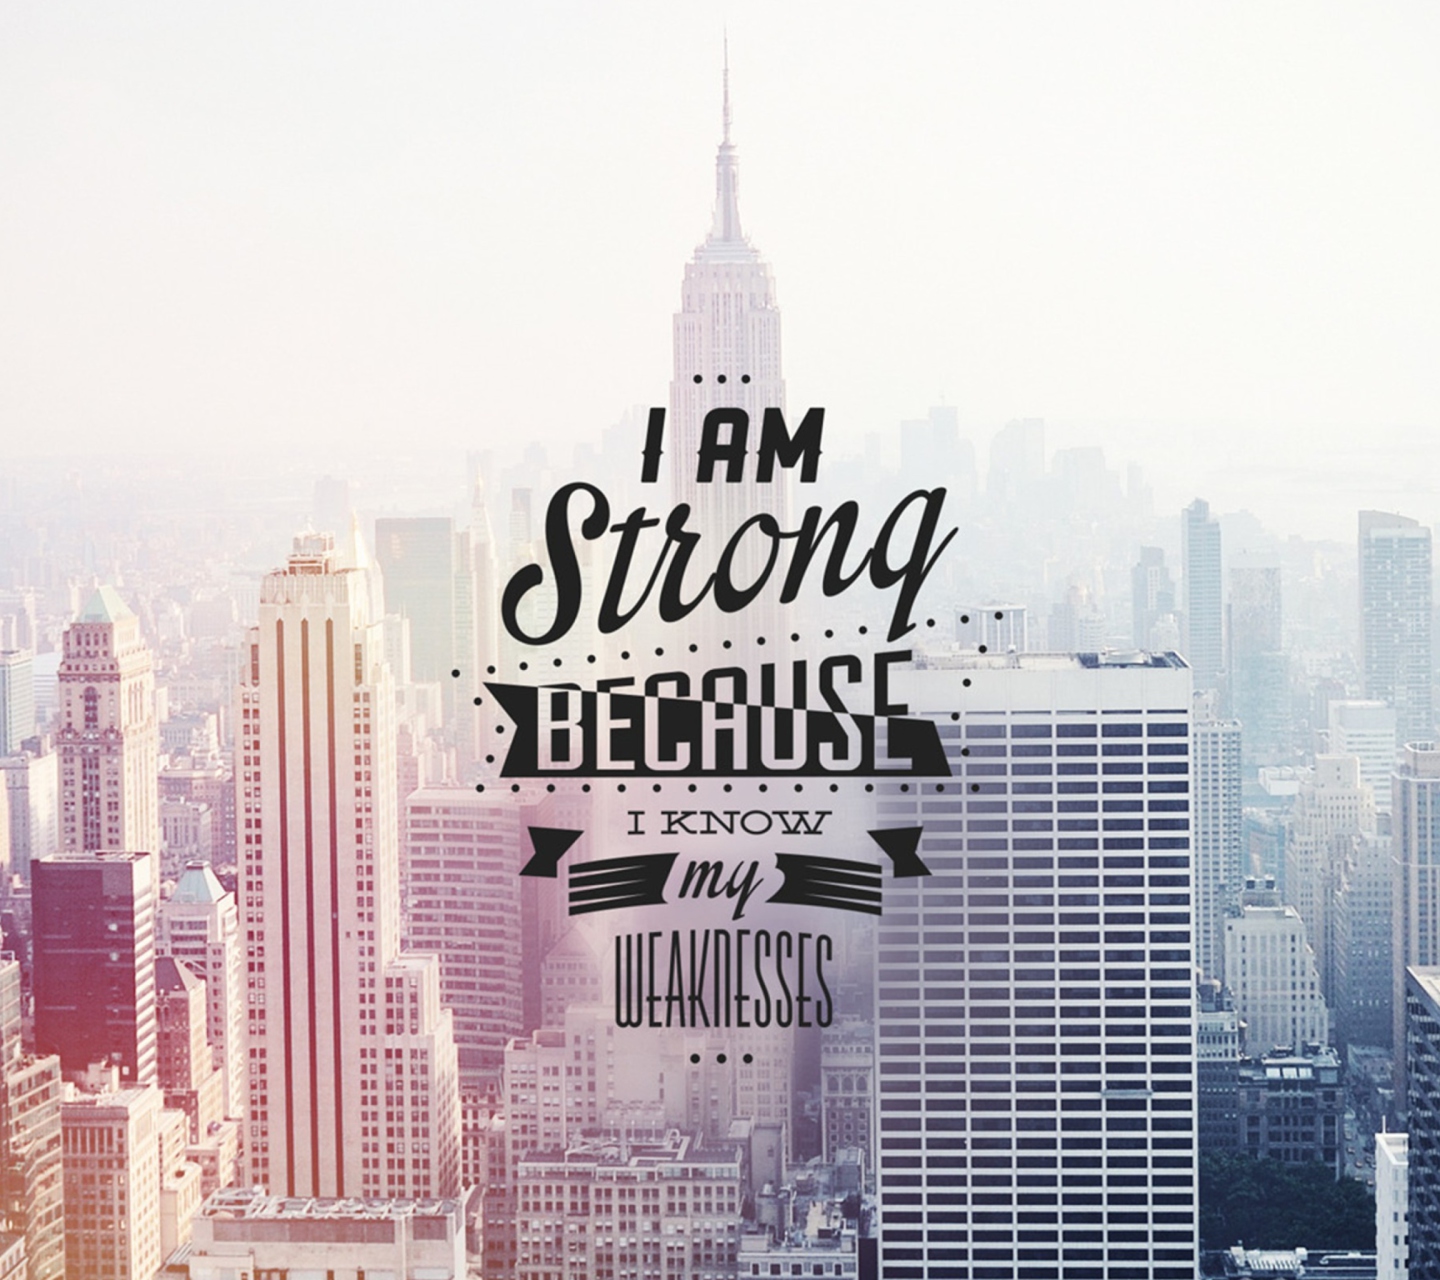 I am strong because i know my weakness wallpaper 1440x1280